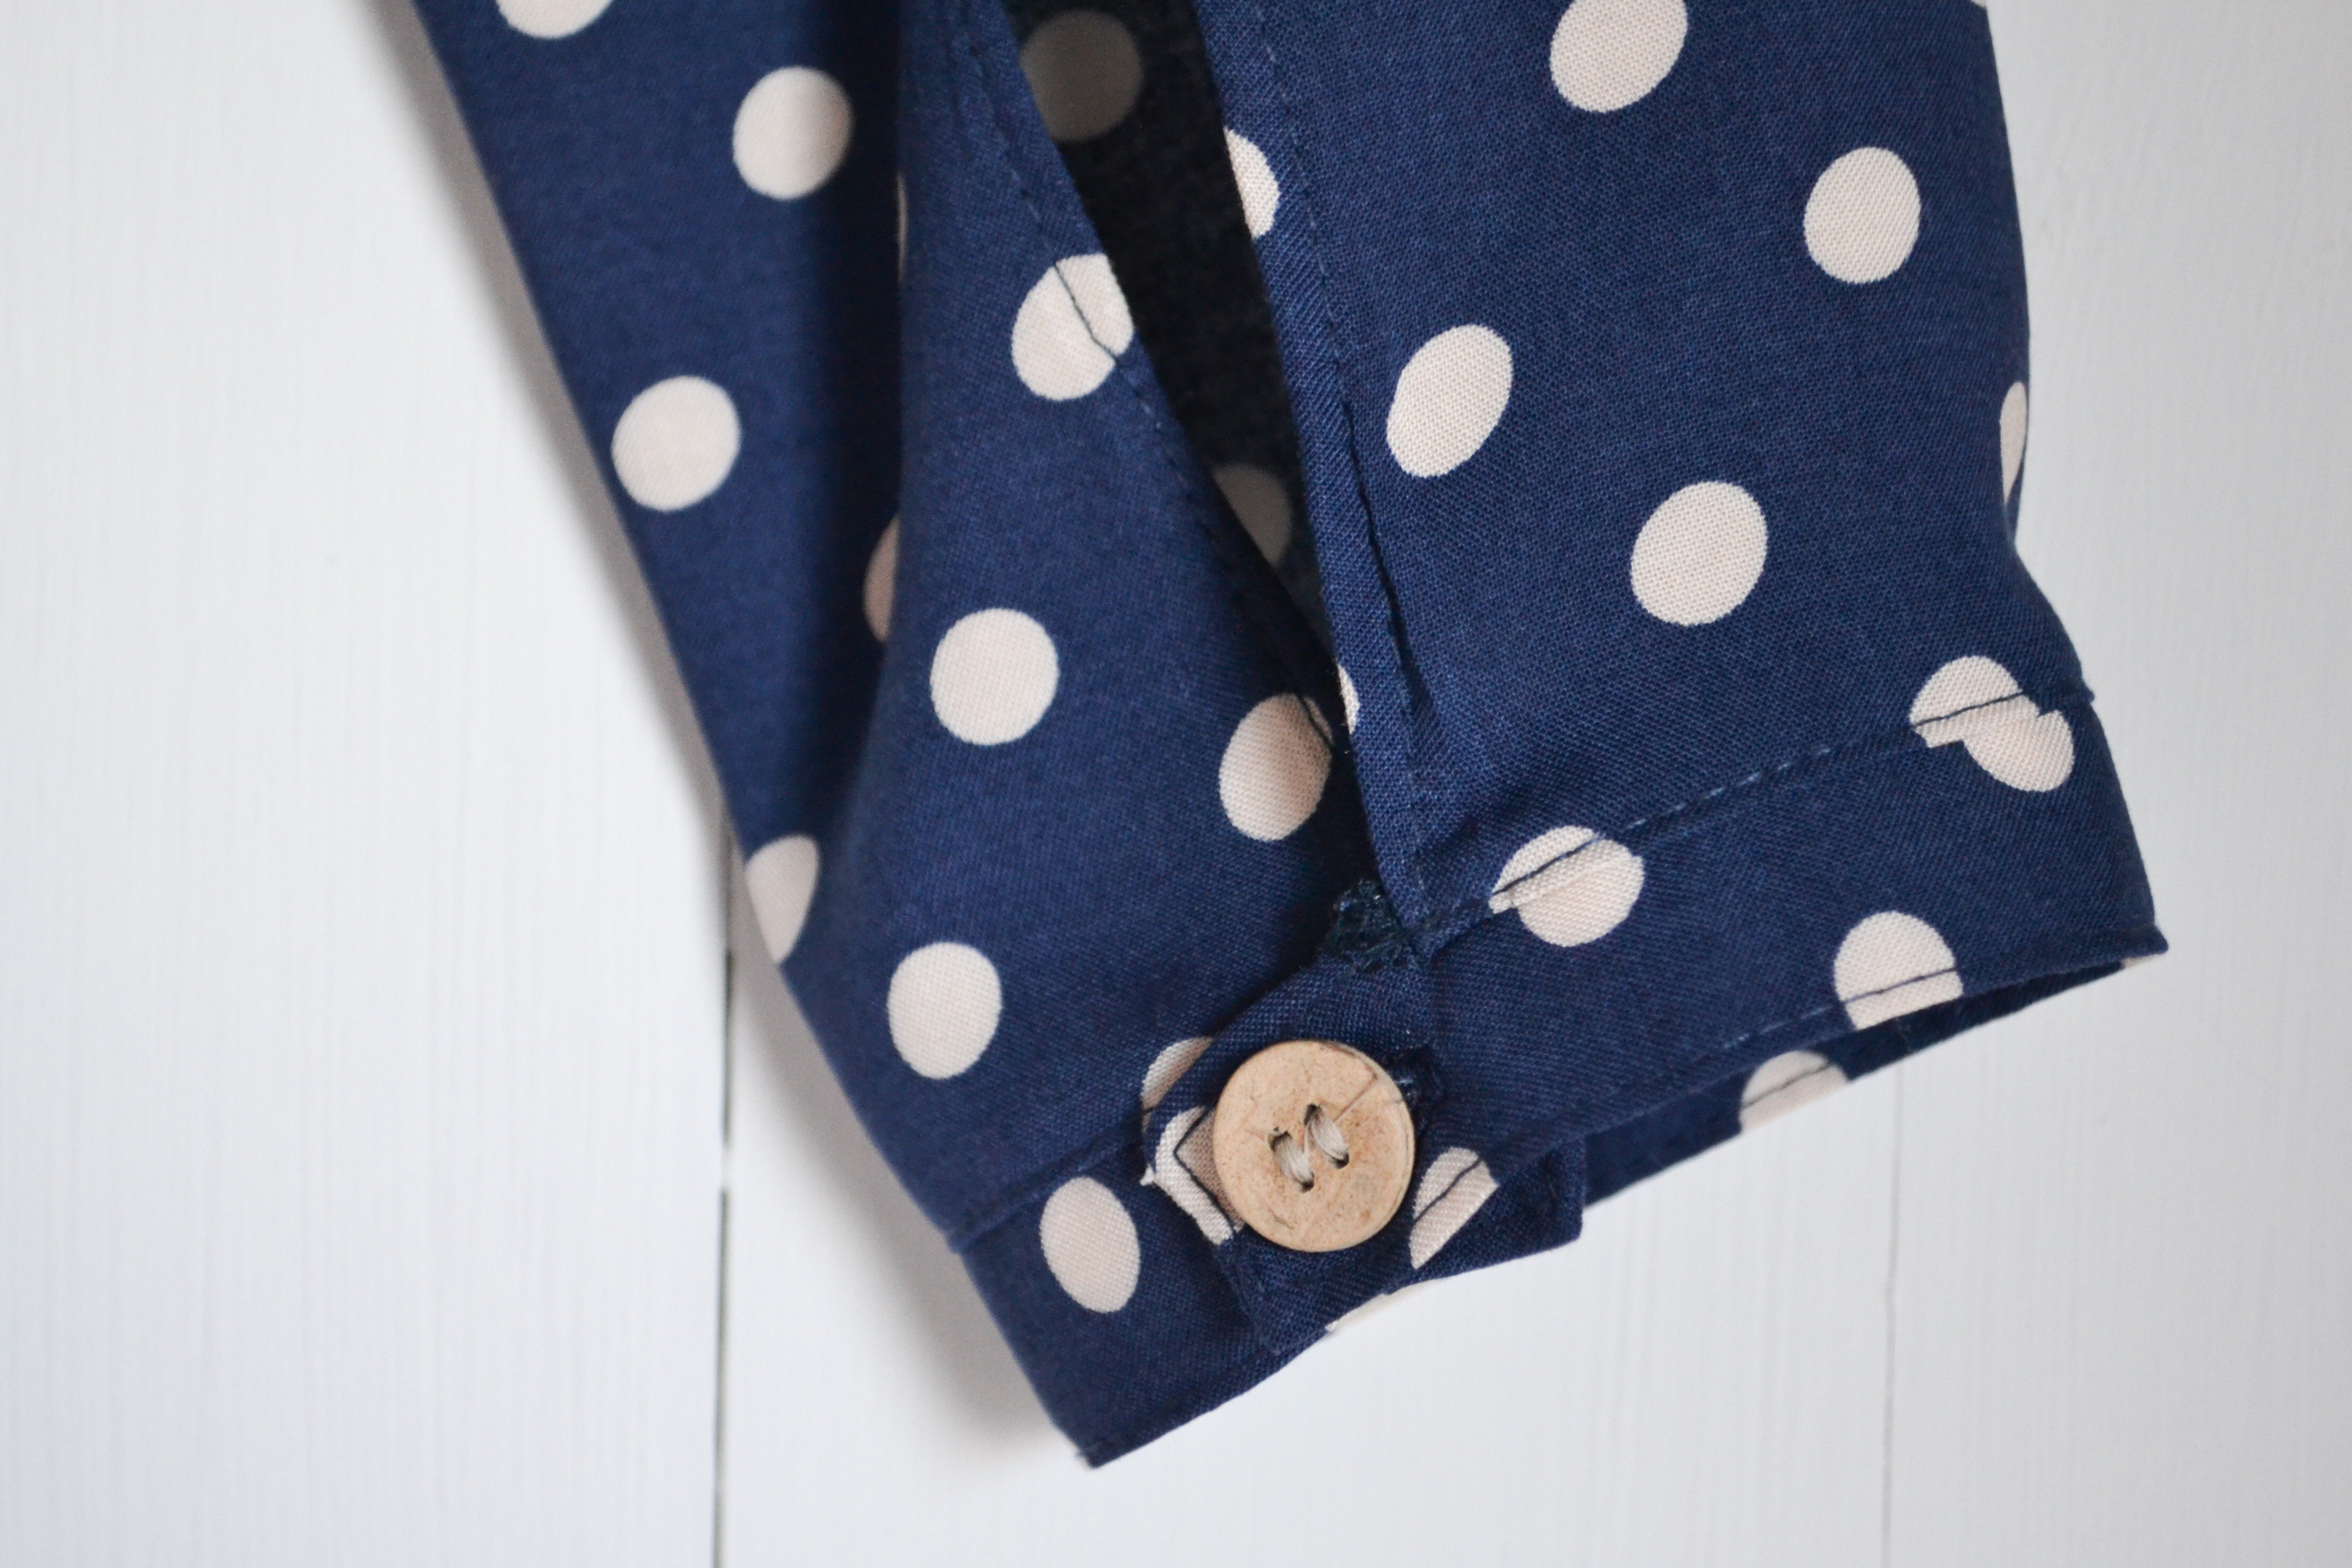 ULTIMATE TOP - BLUE WITH WHITE DOTS